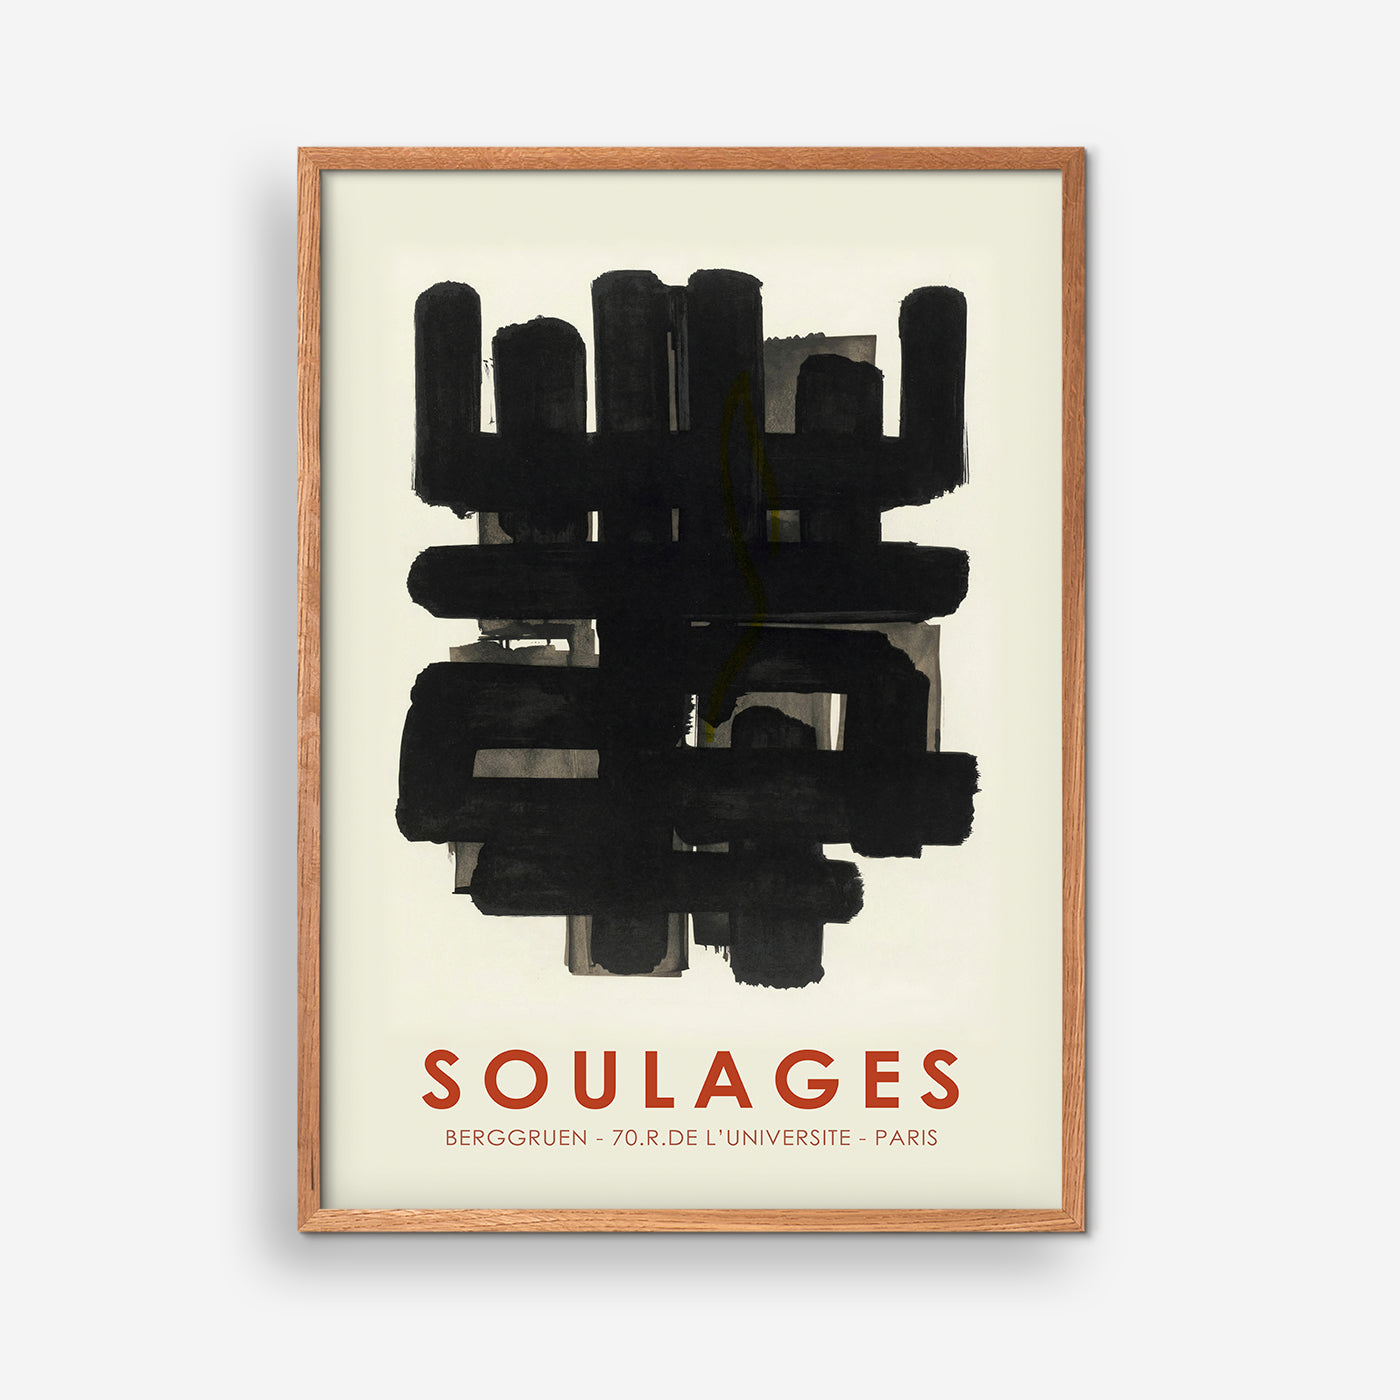 Exhibition posters - Soulages